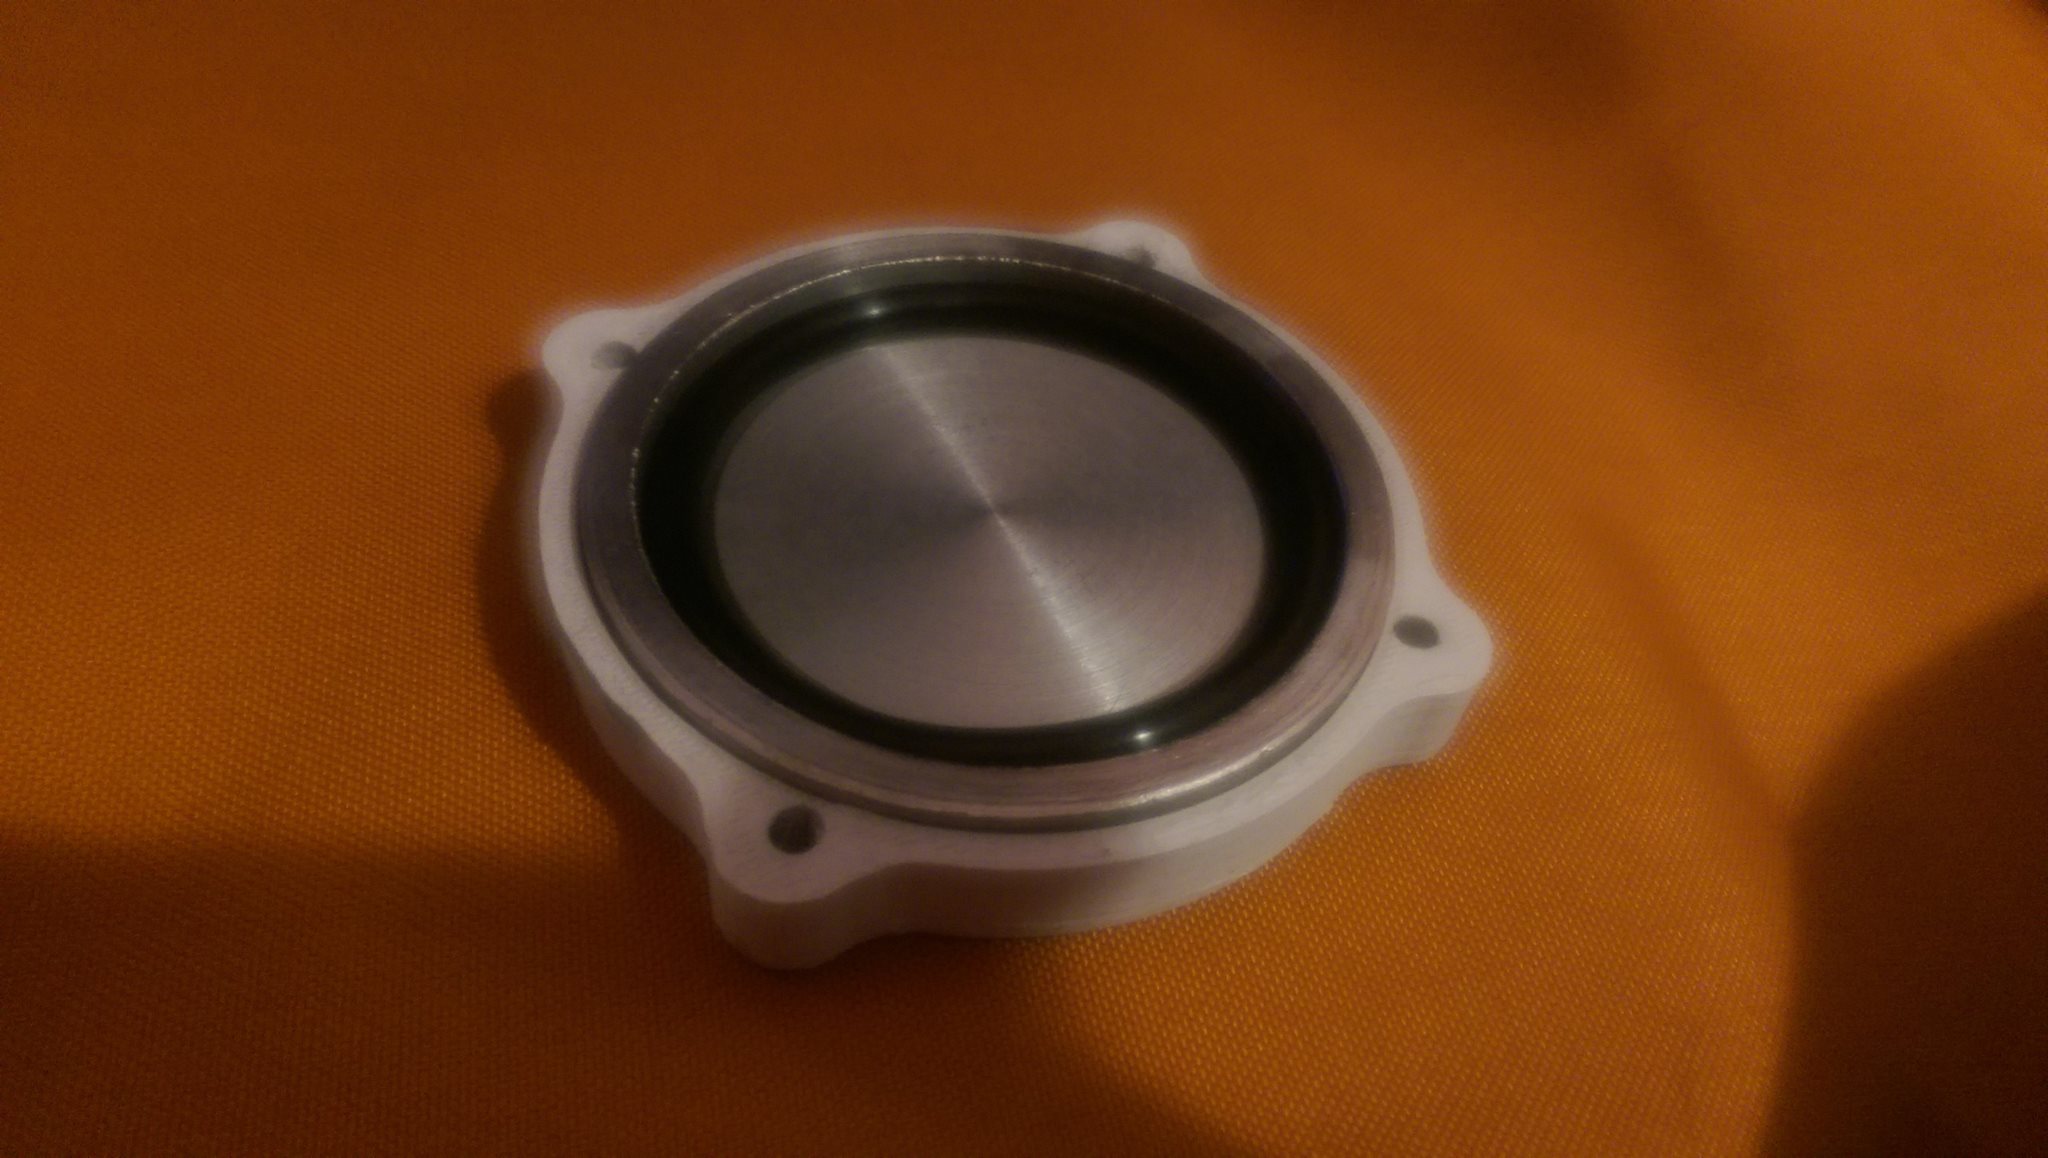 Complete end assembly. Aluminum cap + bracket + o-ring